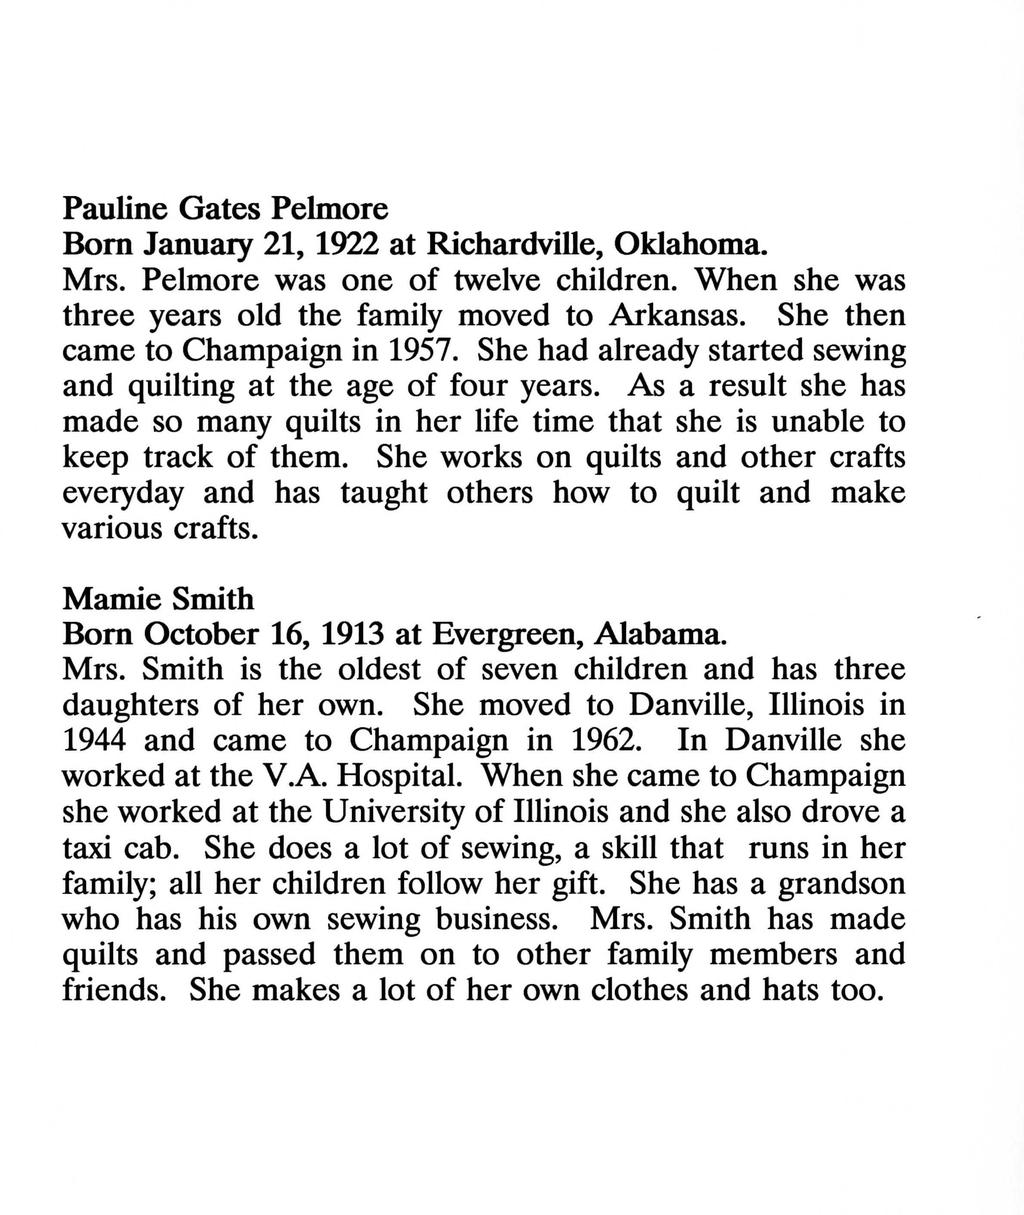 Pauline Gates Pelmore Born January 21, 1922 at Richardville, Oklahoma. Mrs. Pelmore was one of twelve children. When she was three years old the family moved to Arkansas.